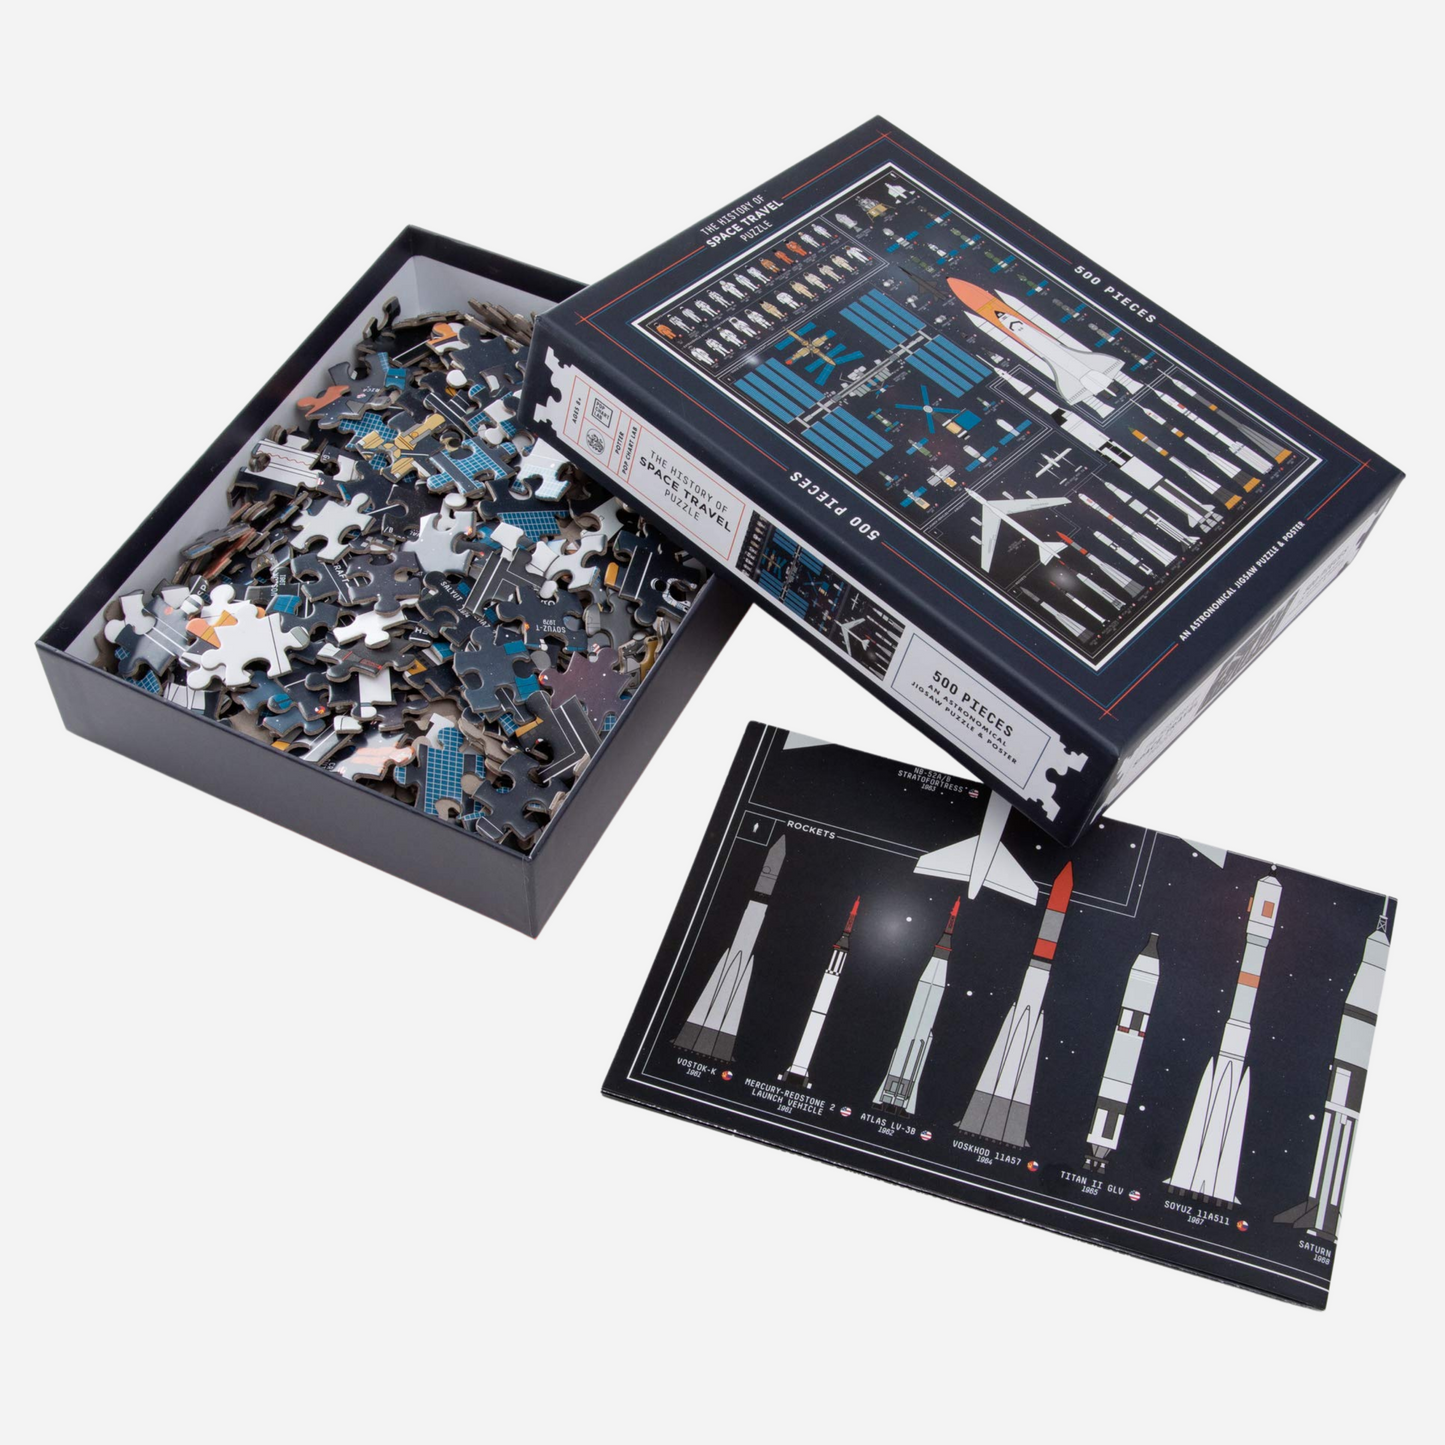 500-piece History of Space Travel Puzzle